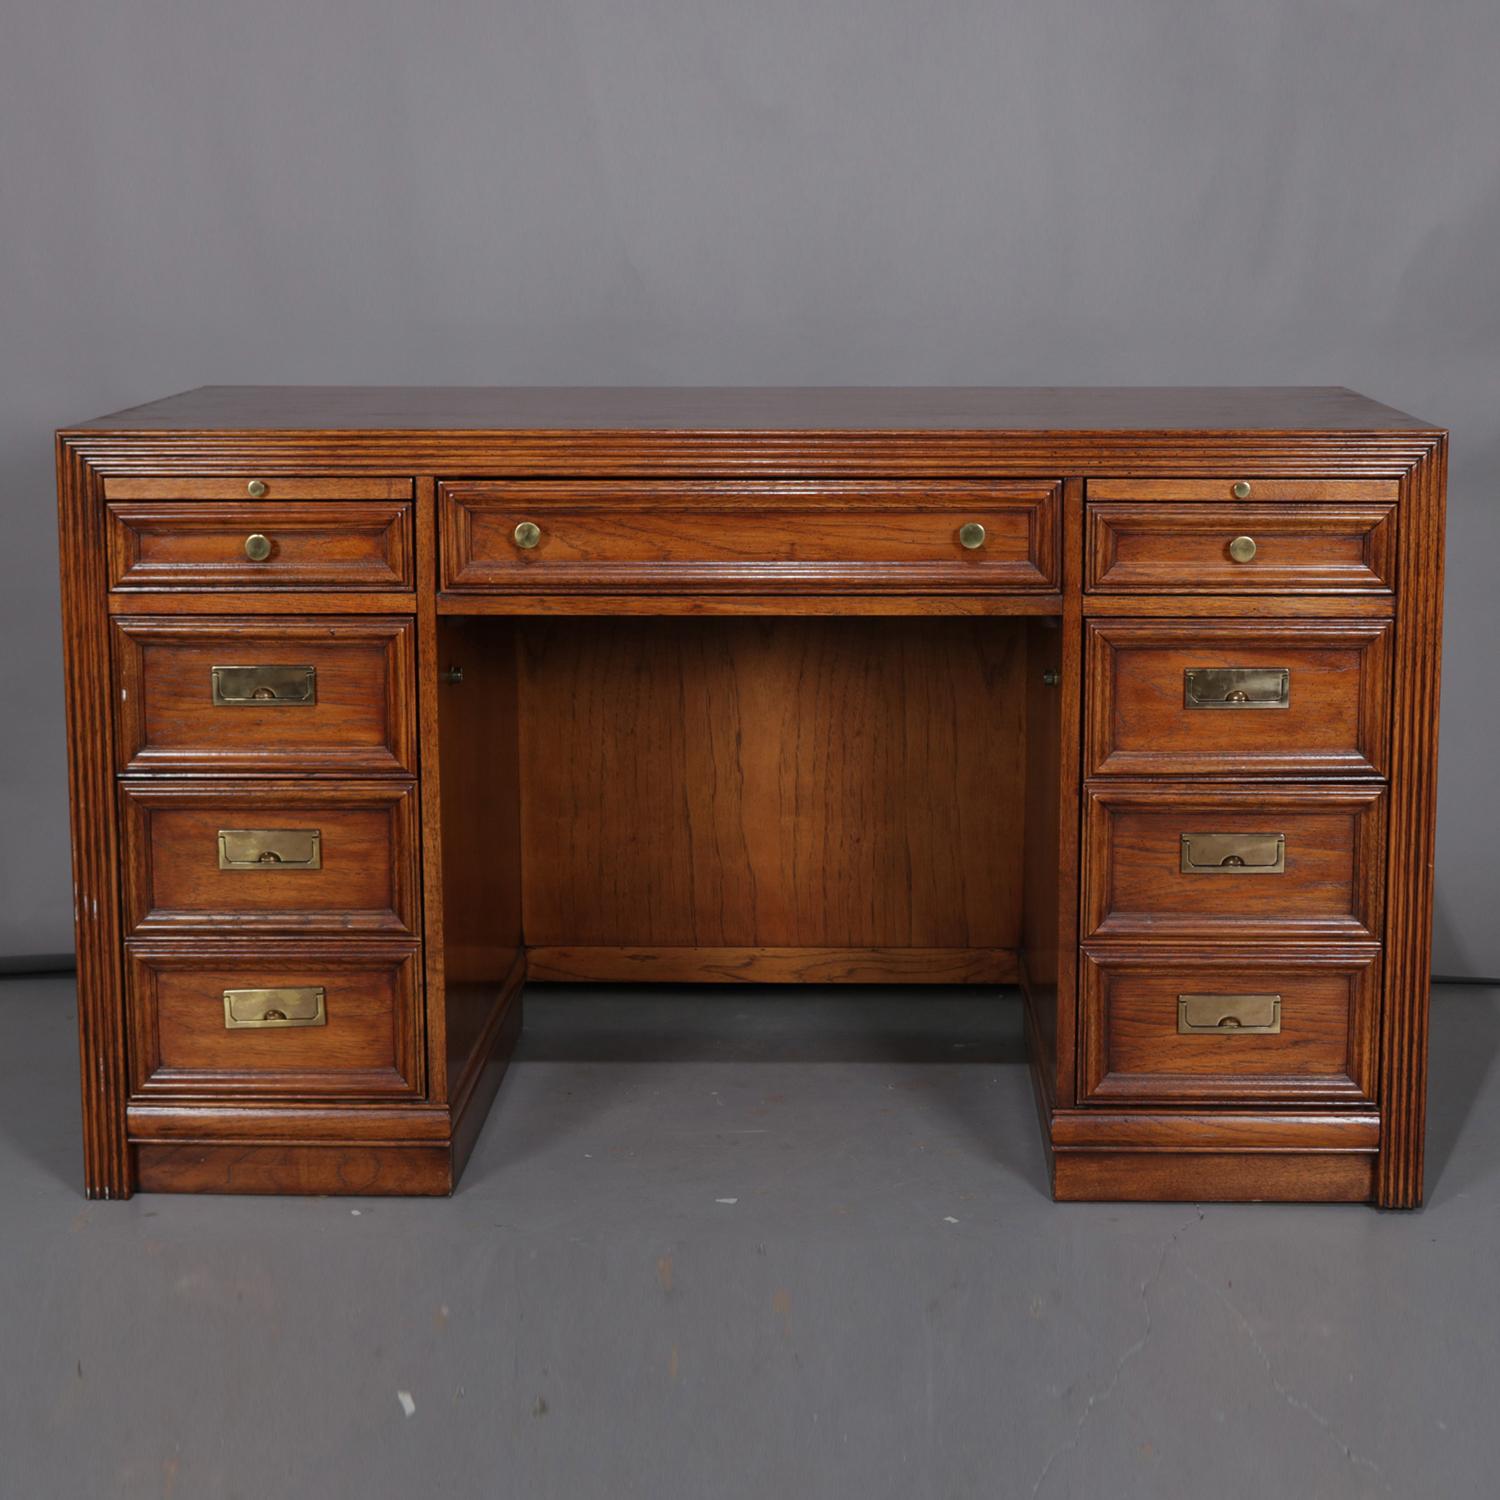 American Thomasville Double Pedestal Oak Campaign Desk with Chair, 20th Century